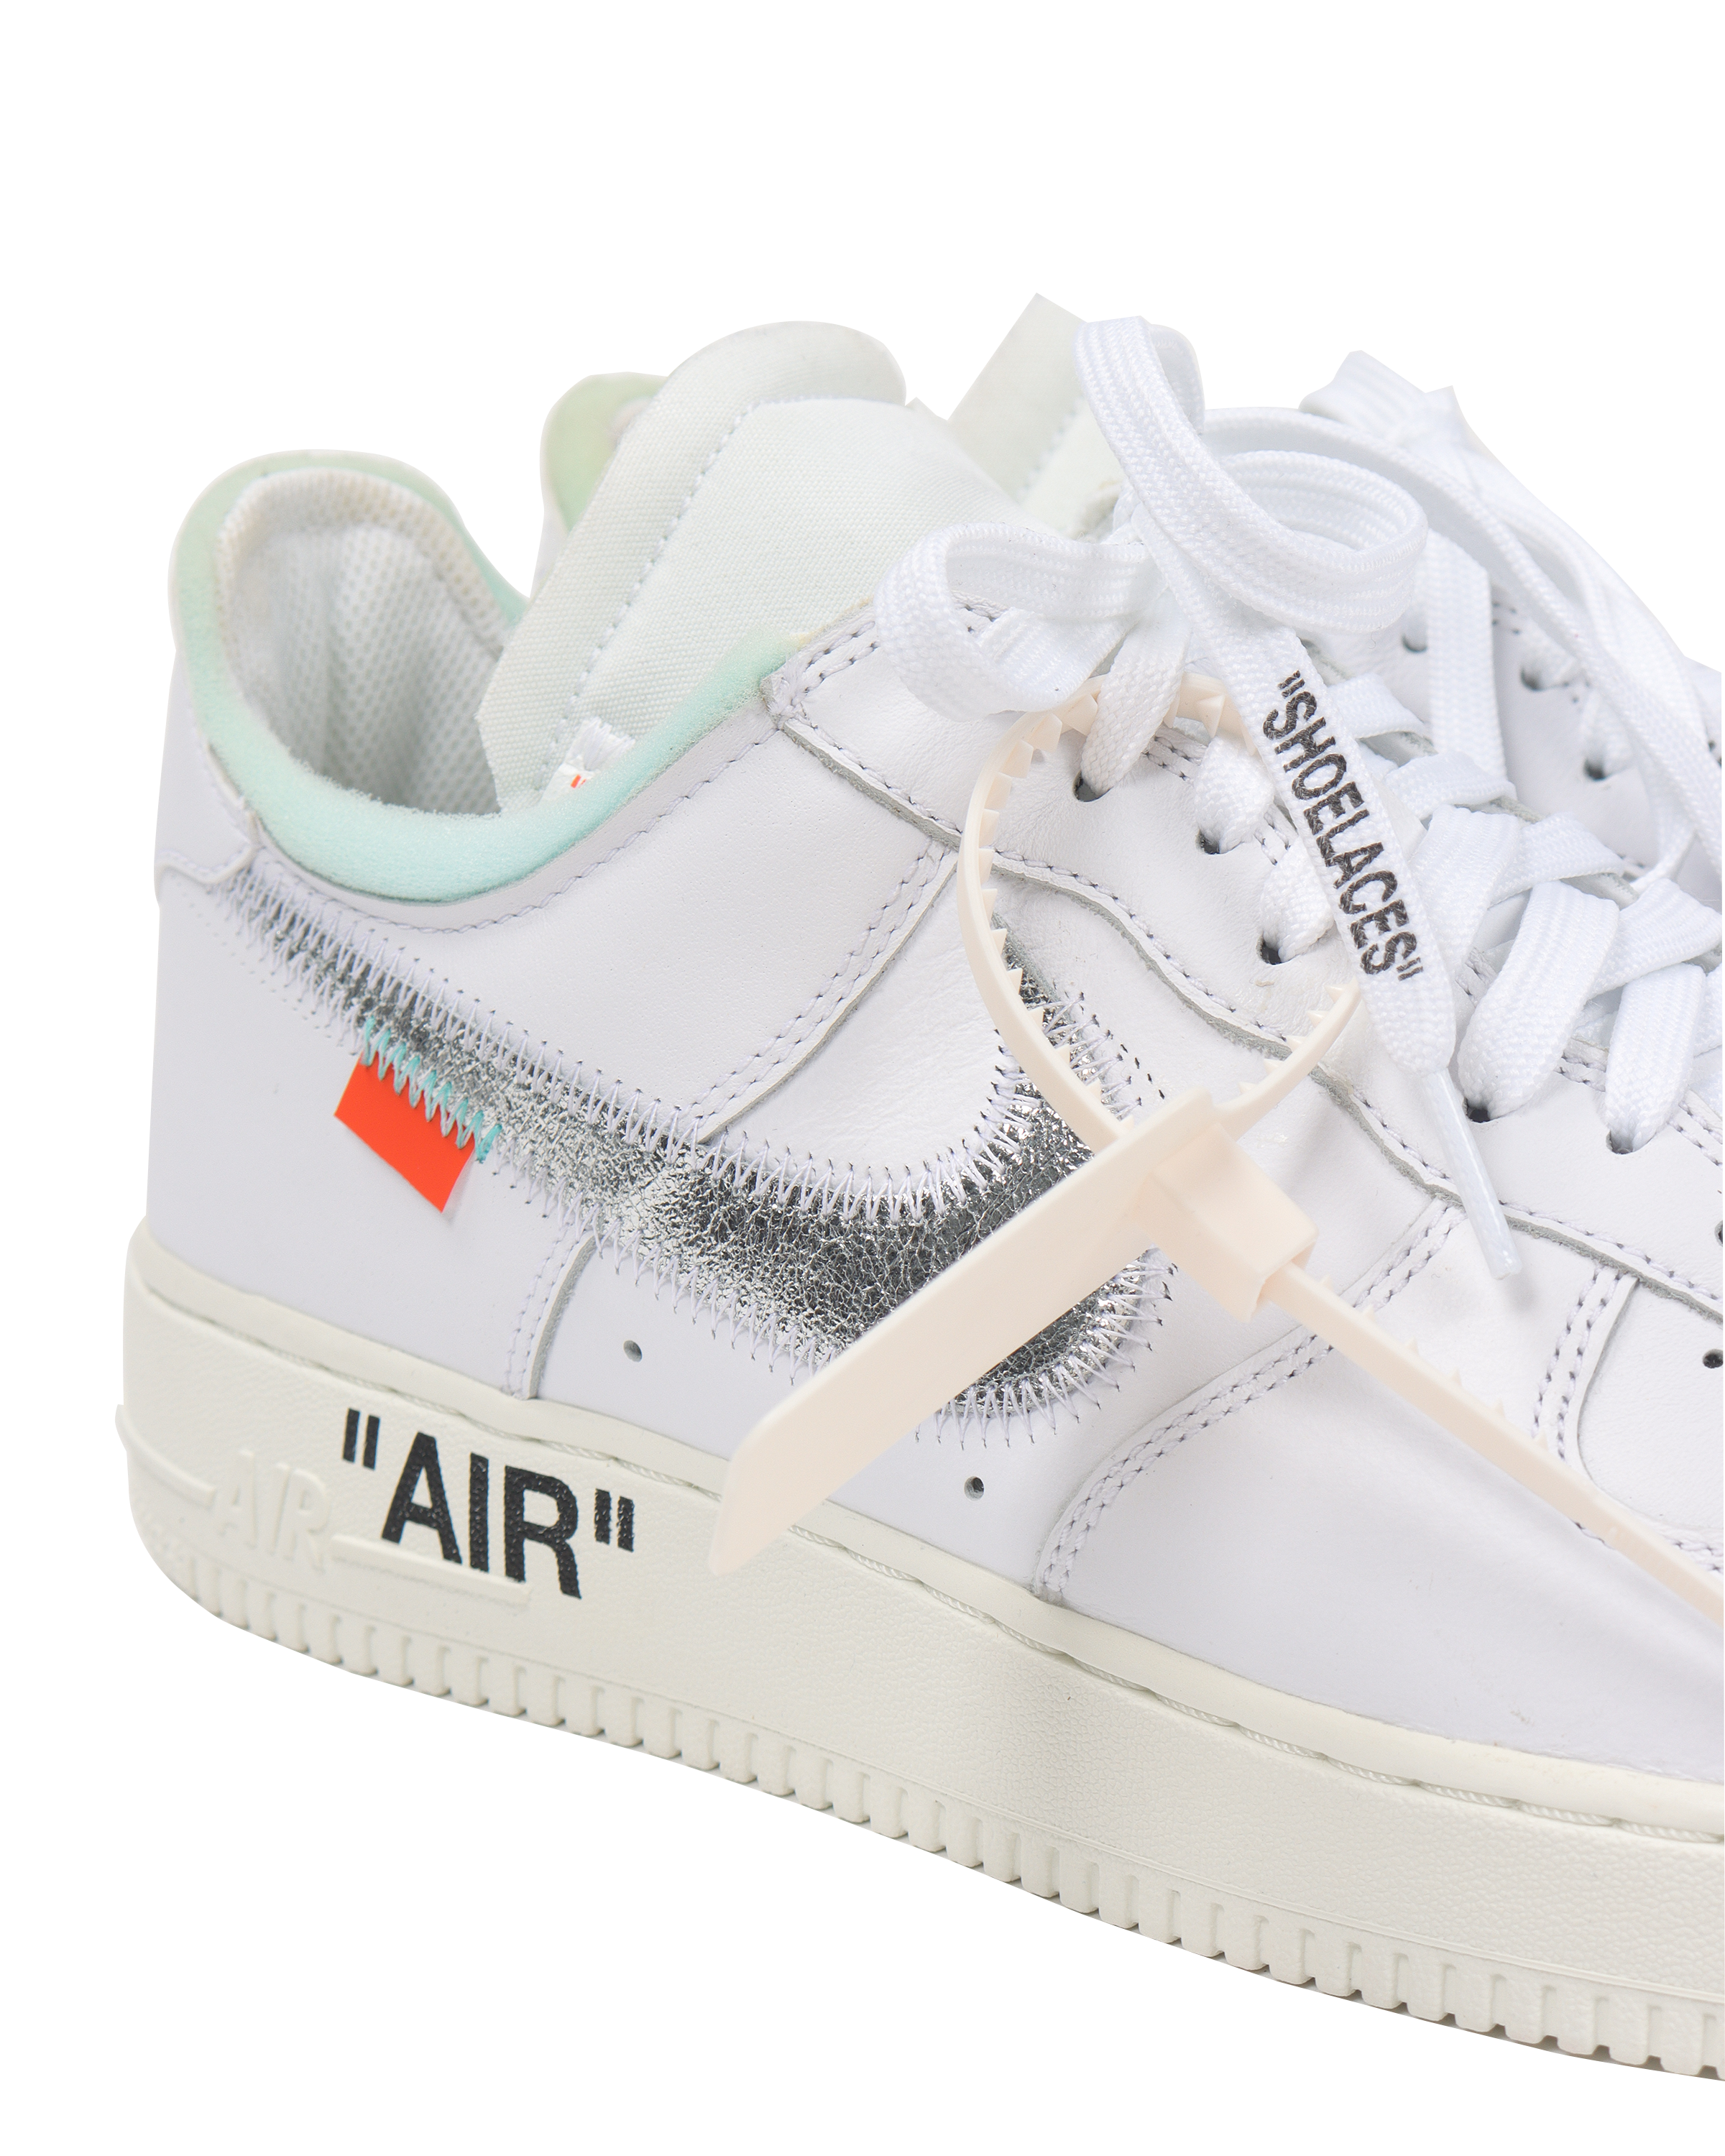 OFF-WHITE x Nike Air Force 1 '07 ComplexCon 2018 - JustFreshKicks